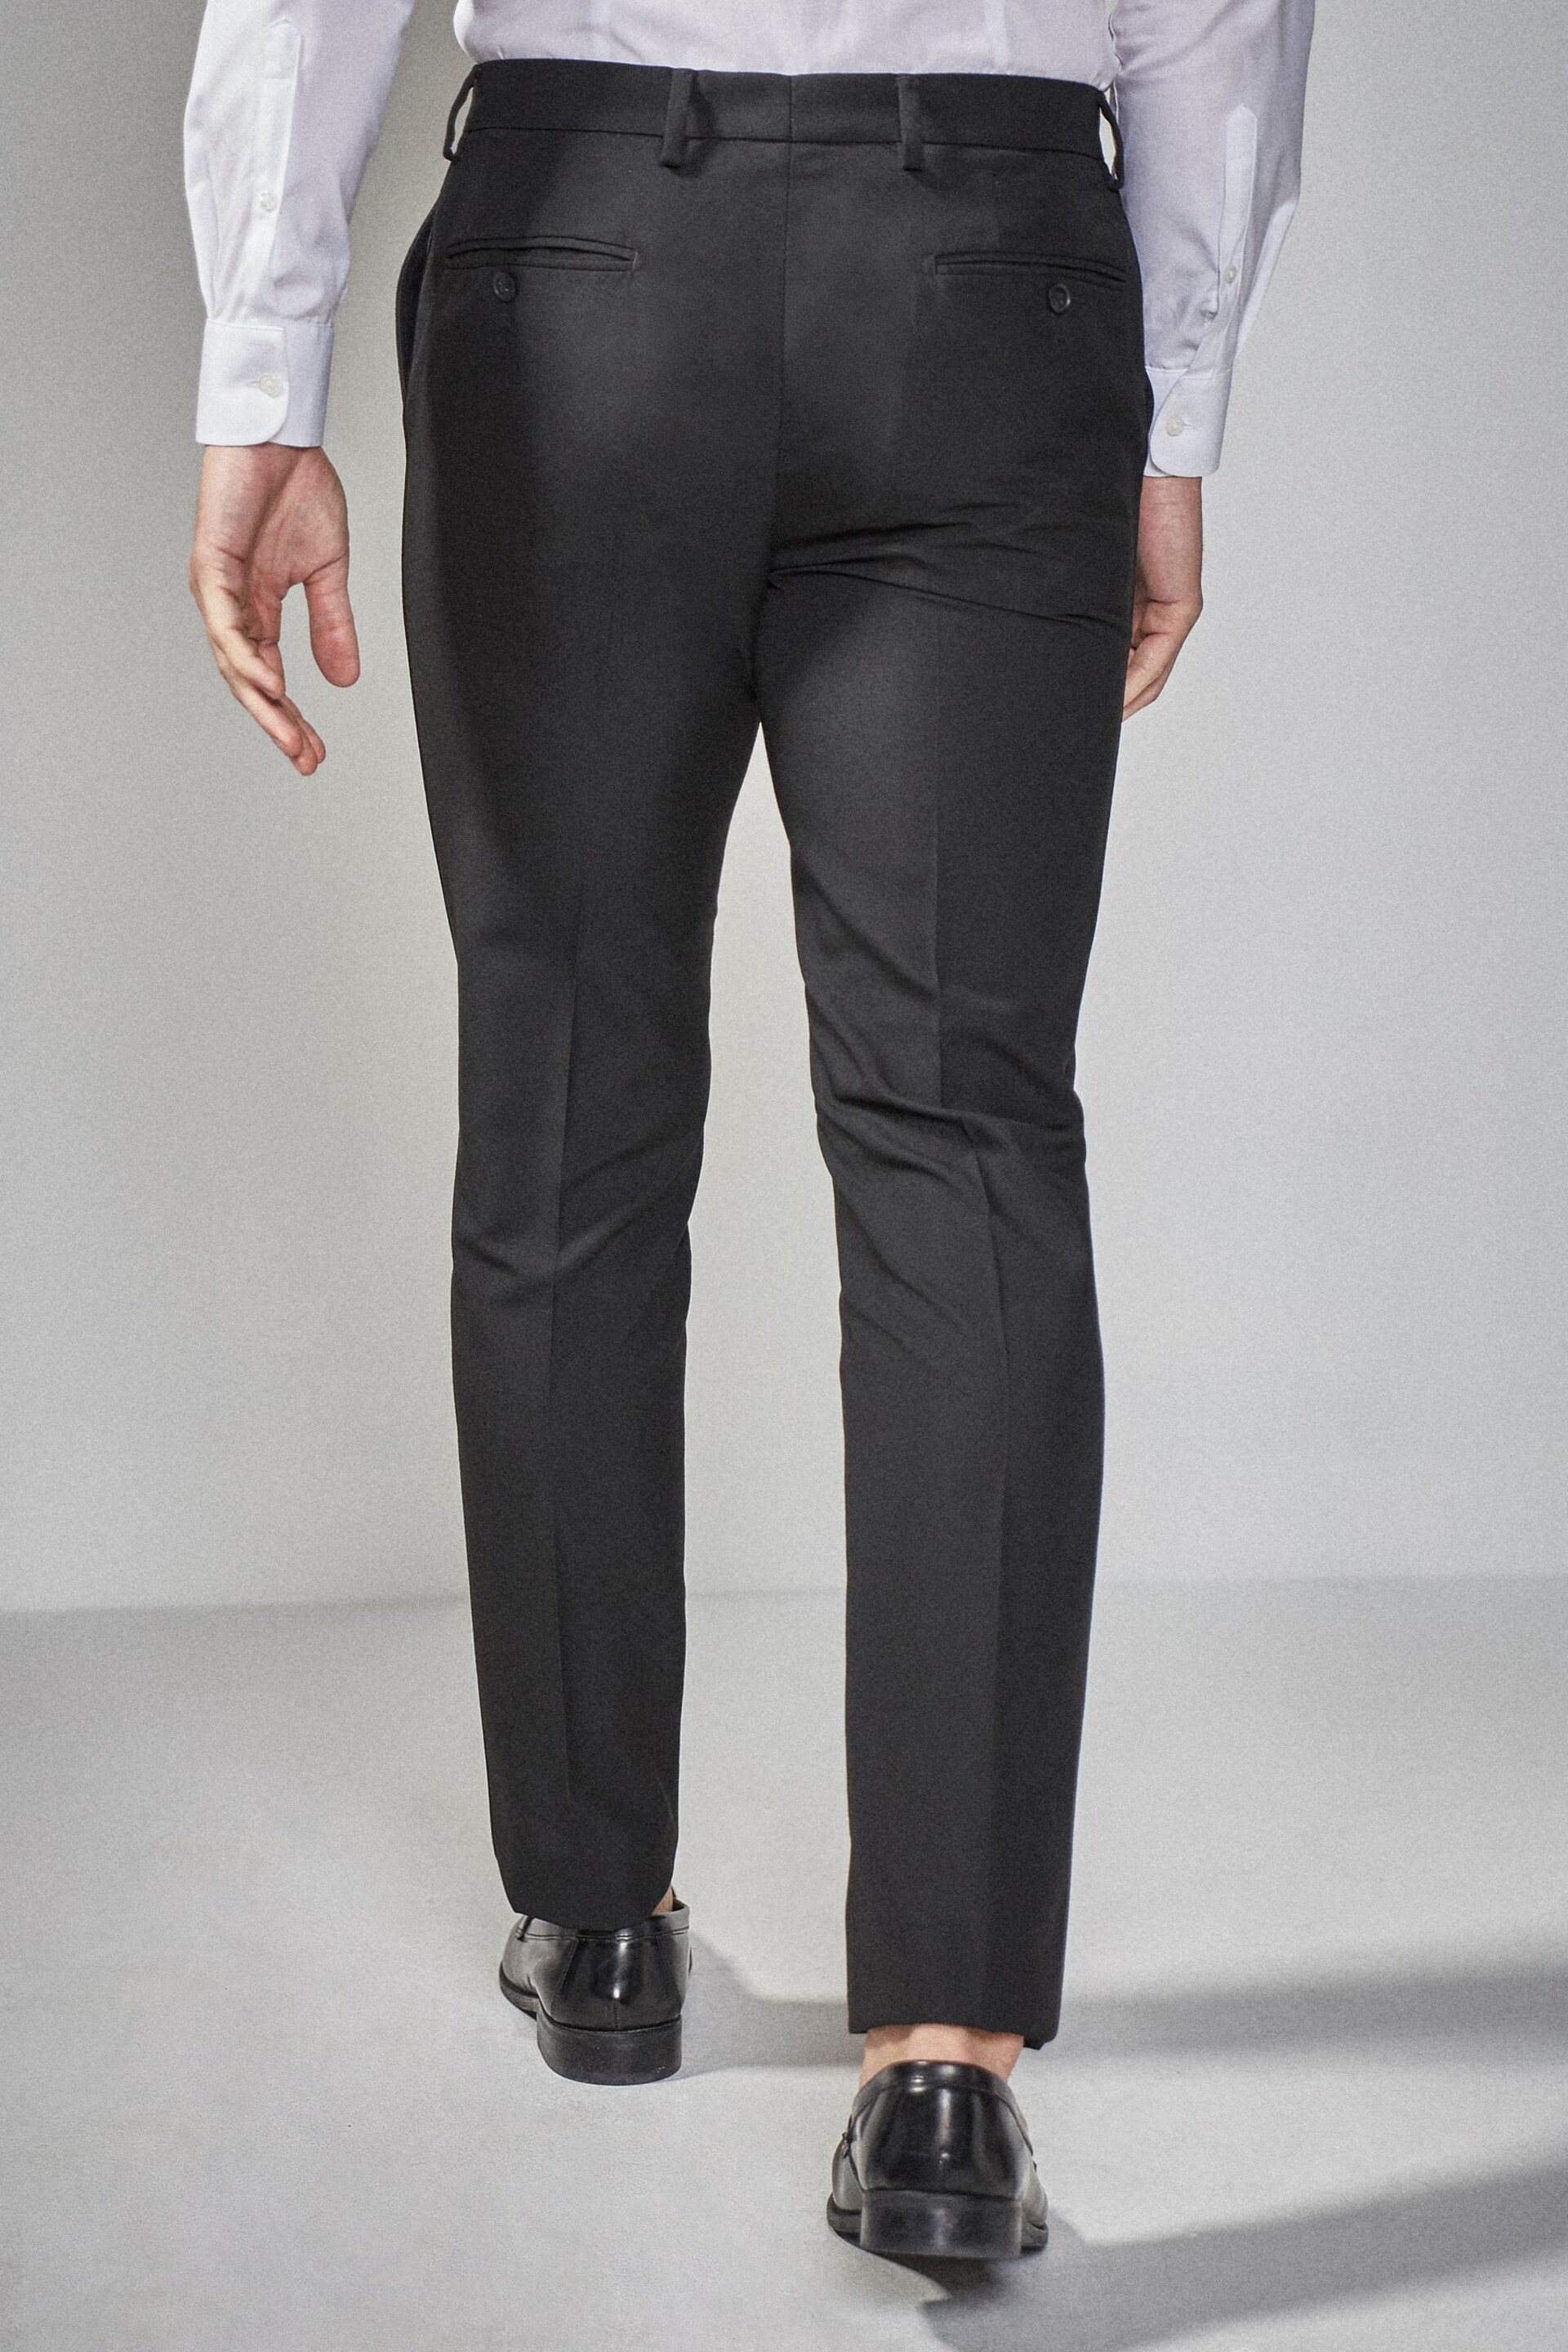 Dark Black Skinny Fit Tuxedo Suit Trousers with Tape Detail - Image 4 of 7